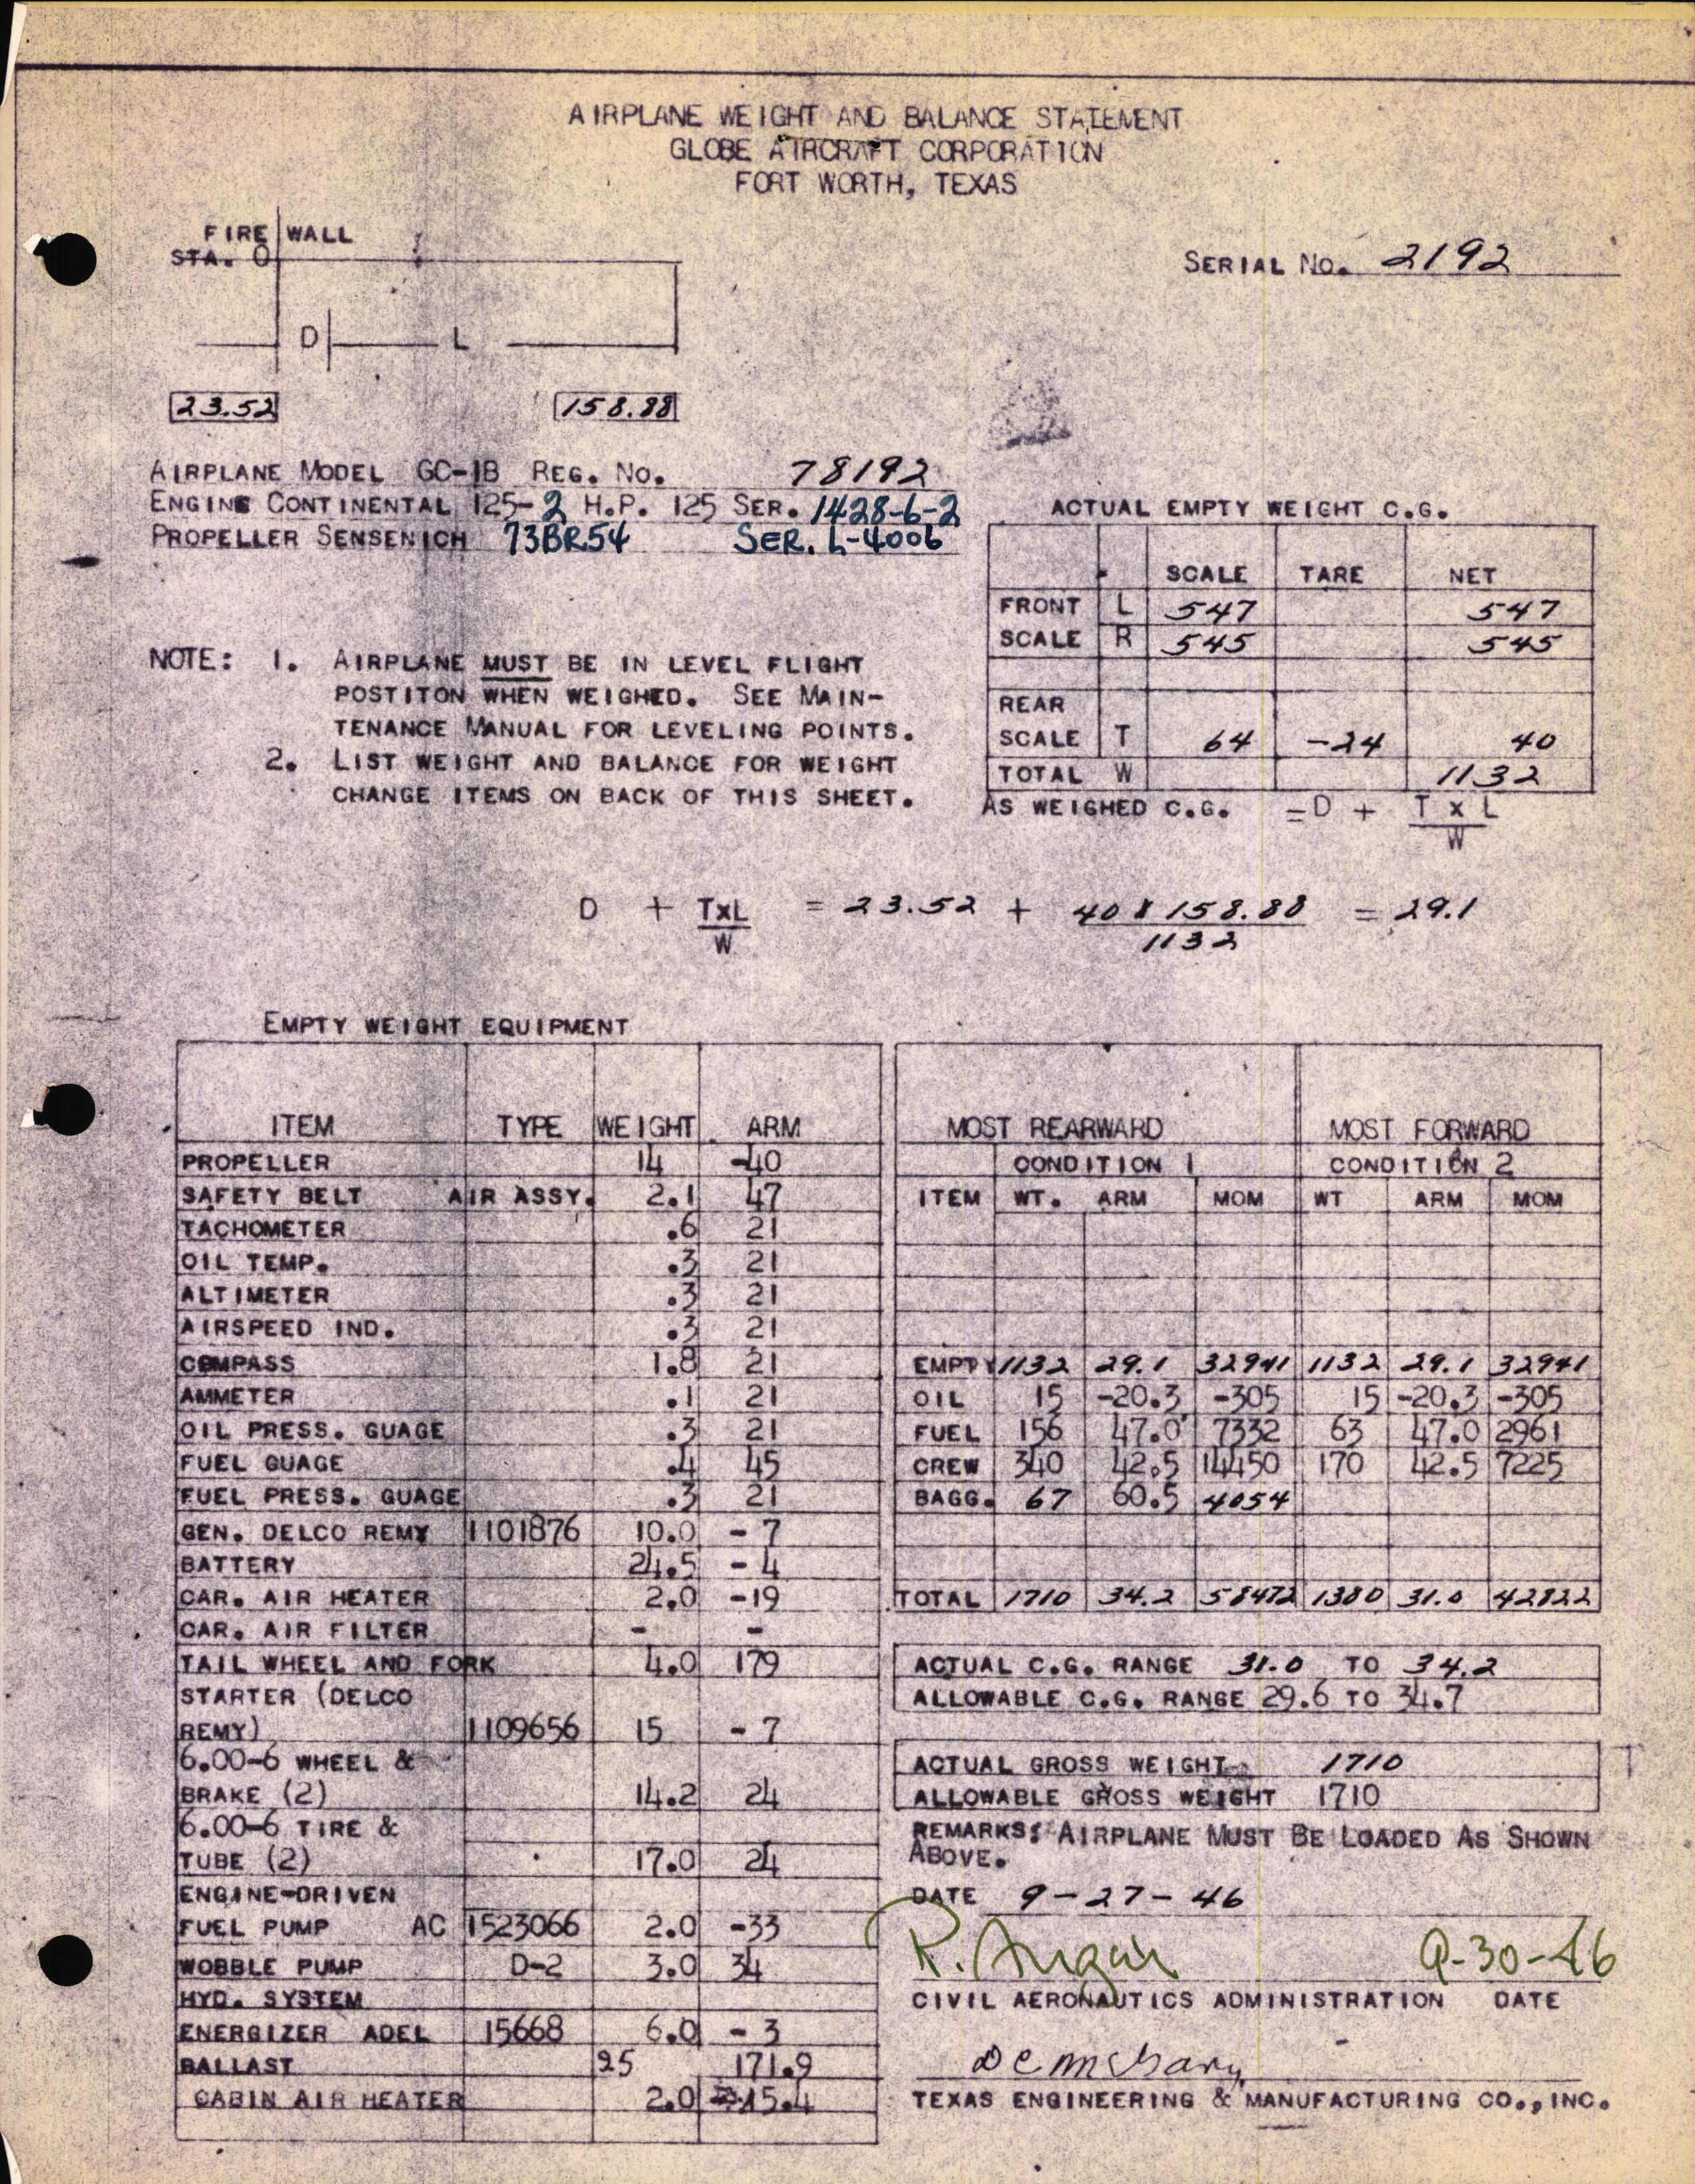 Sample page 1 from AirCorps Library document: Technical Information for Serial Number 2192